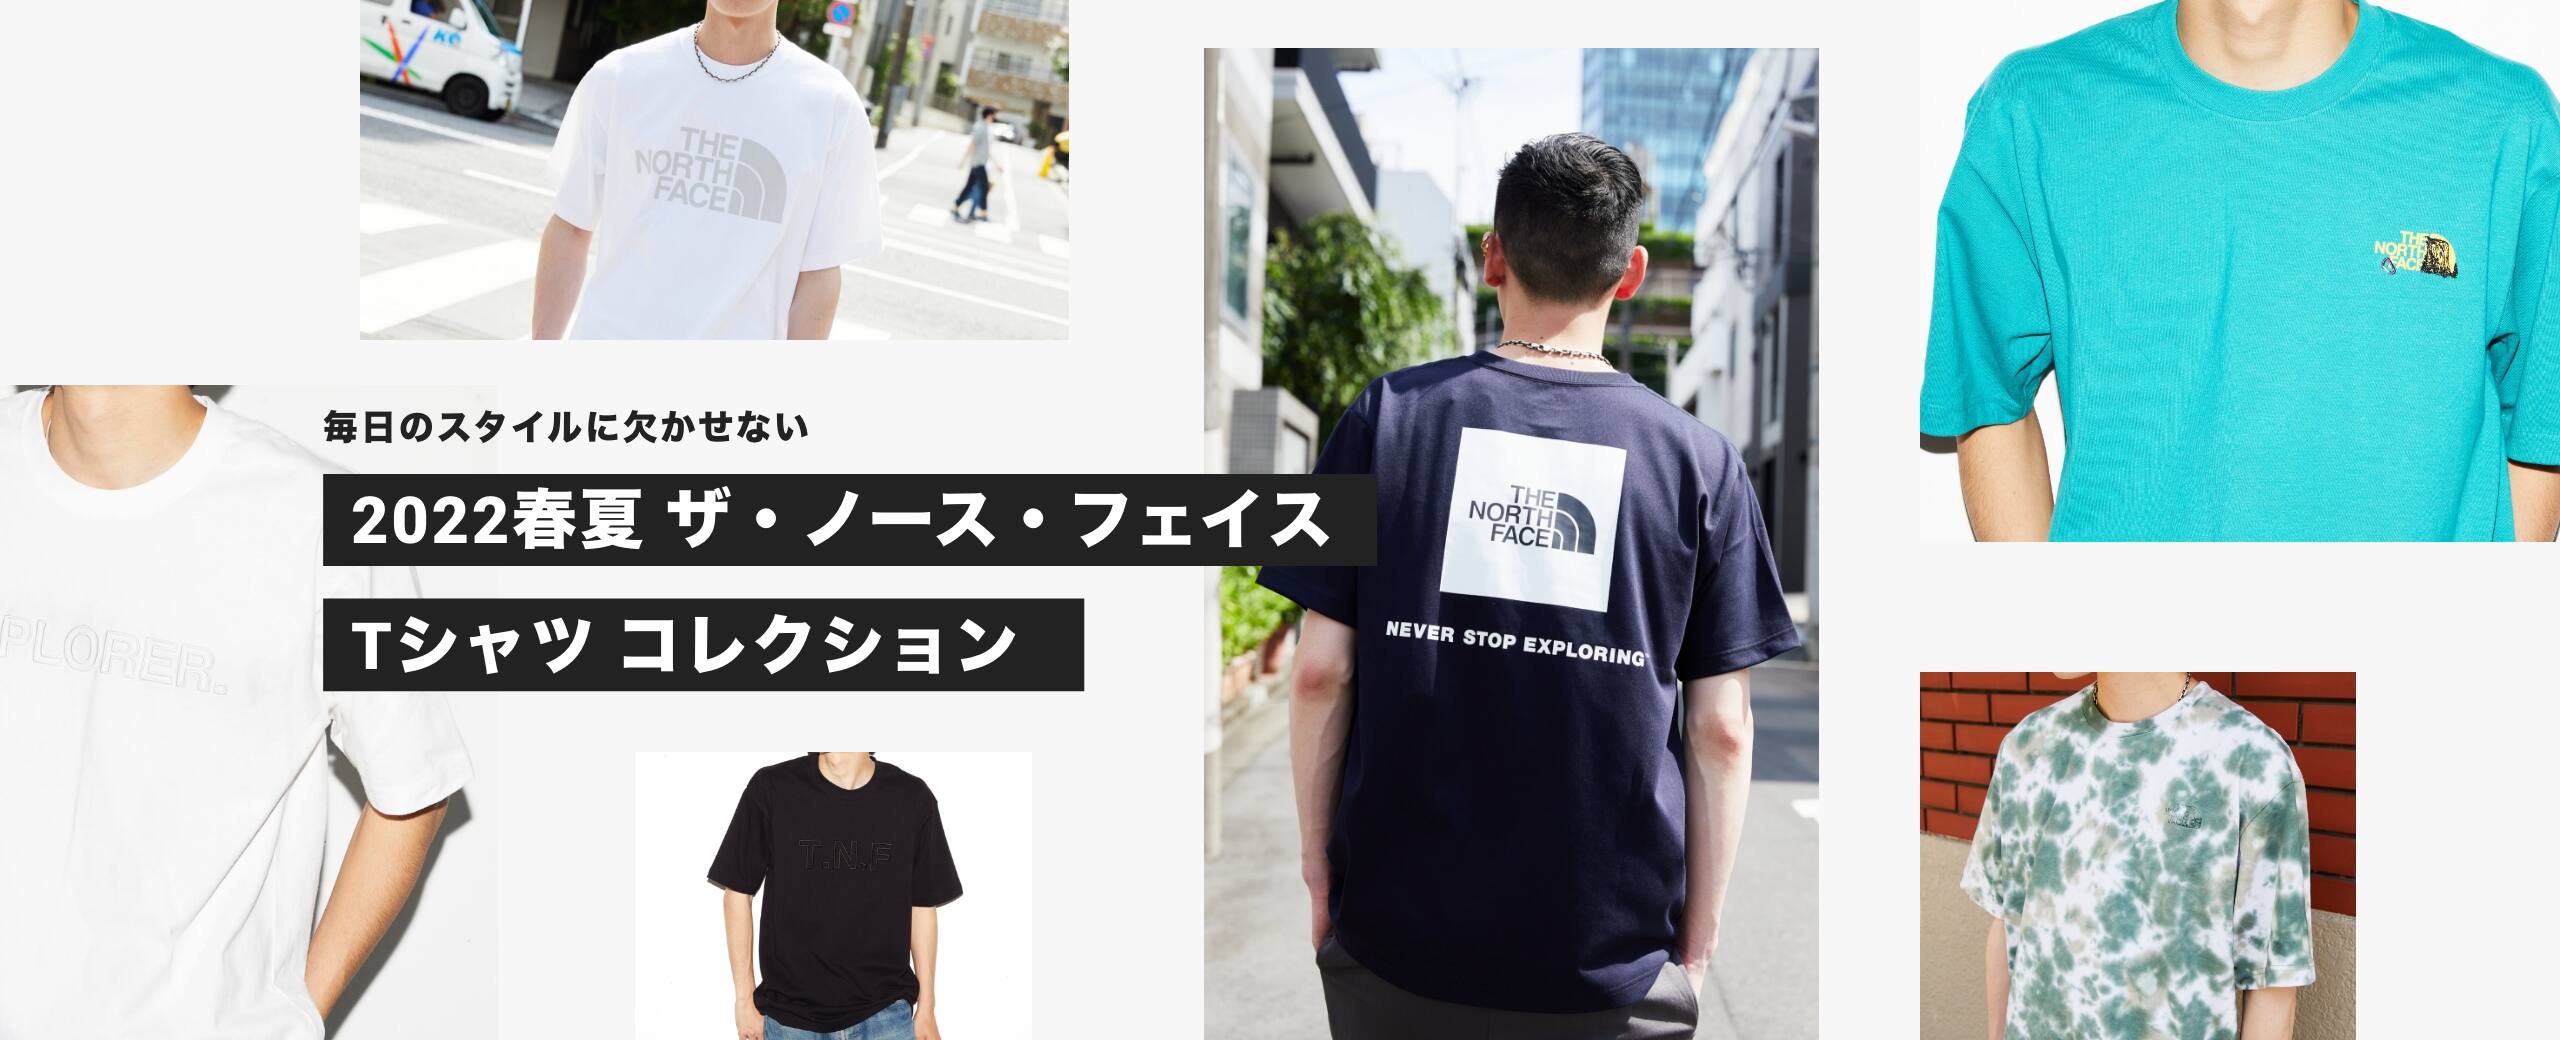 THE NORTH FACE Tシャツ特集 